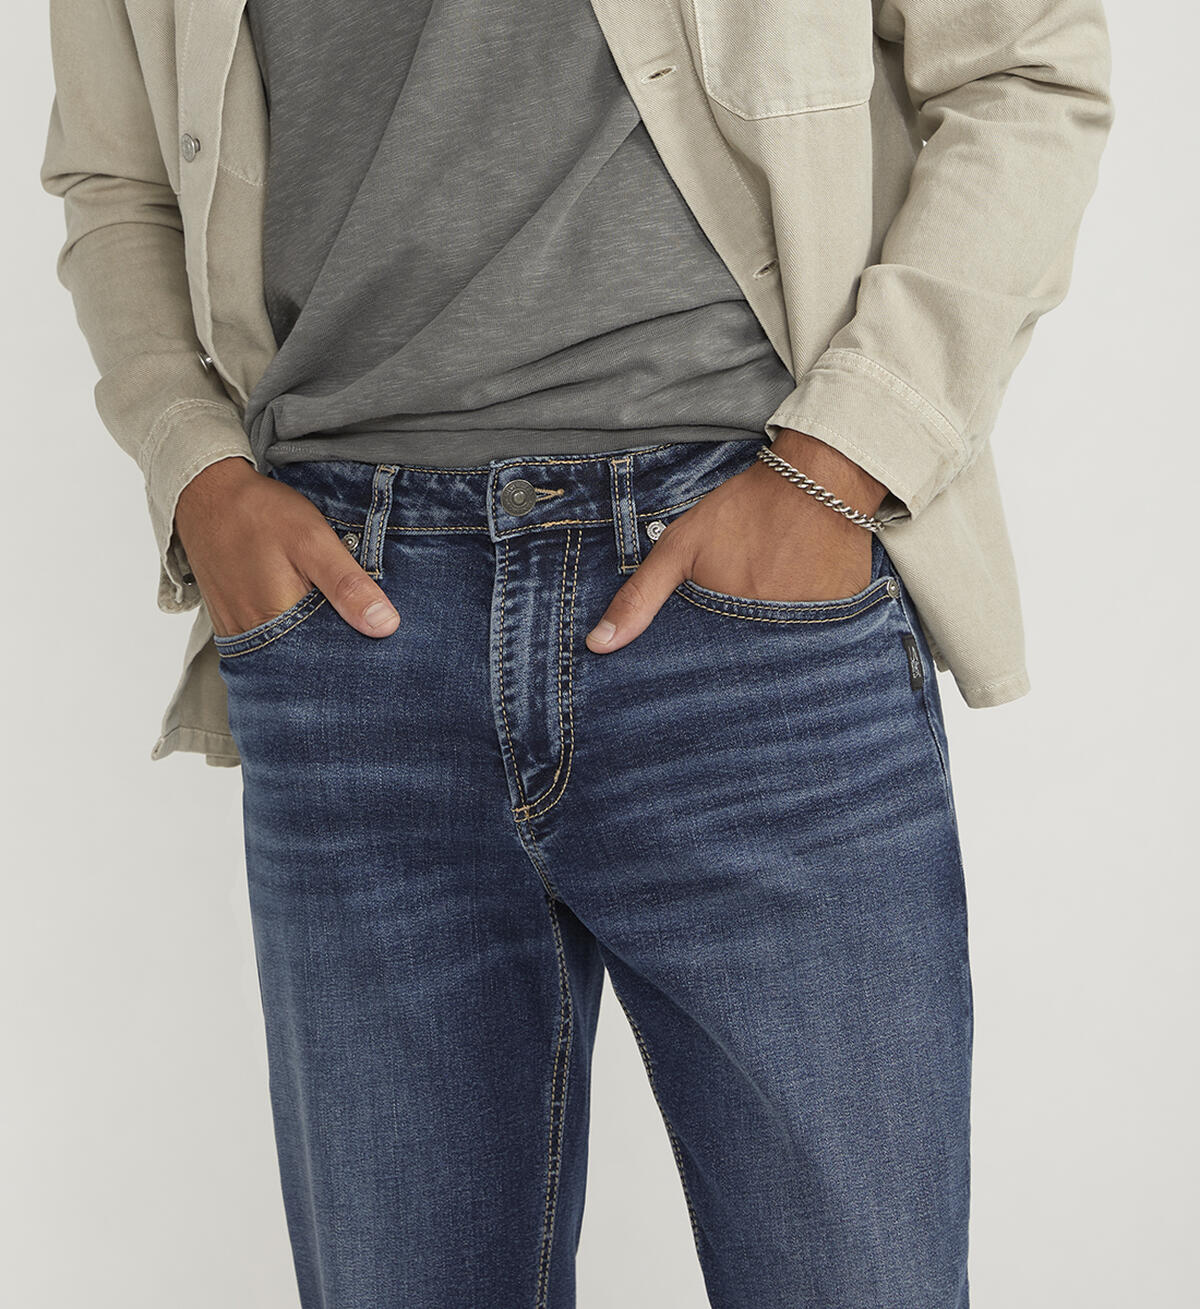 Machray is a modern take on the athletic fit jean. This style features a longer saddle and a slim-yet-spacious fit through the hip and thigh—proving some much-needed room for muscles